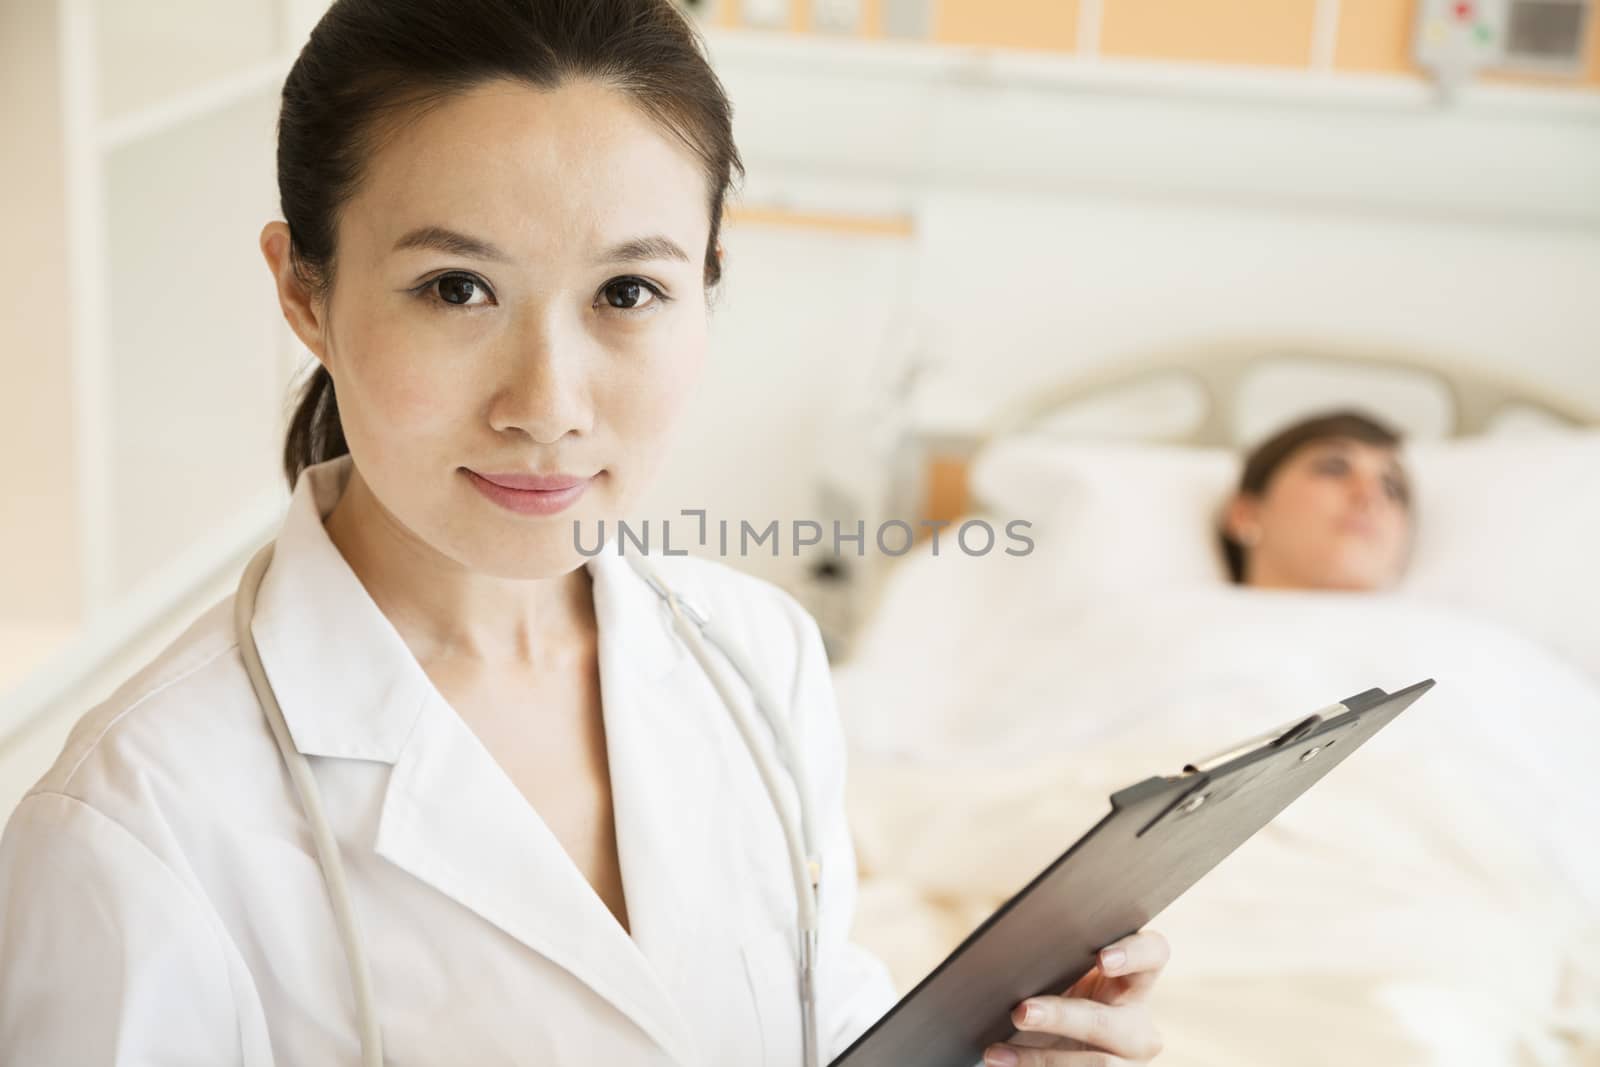 Portrait of smiling doctor holding a medical chart with patient lying in a hospital bed in the background